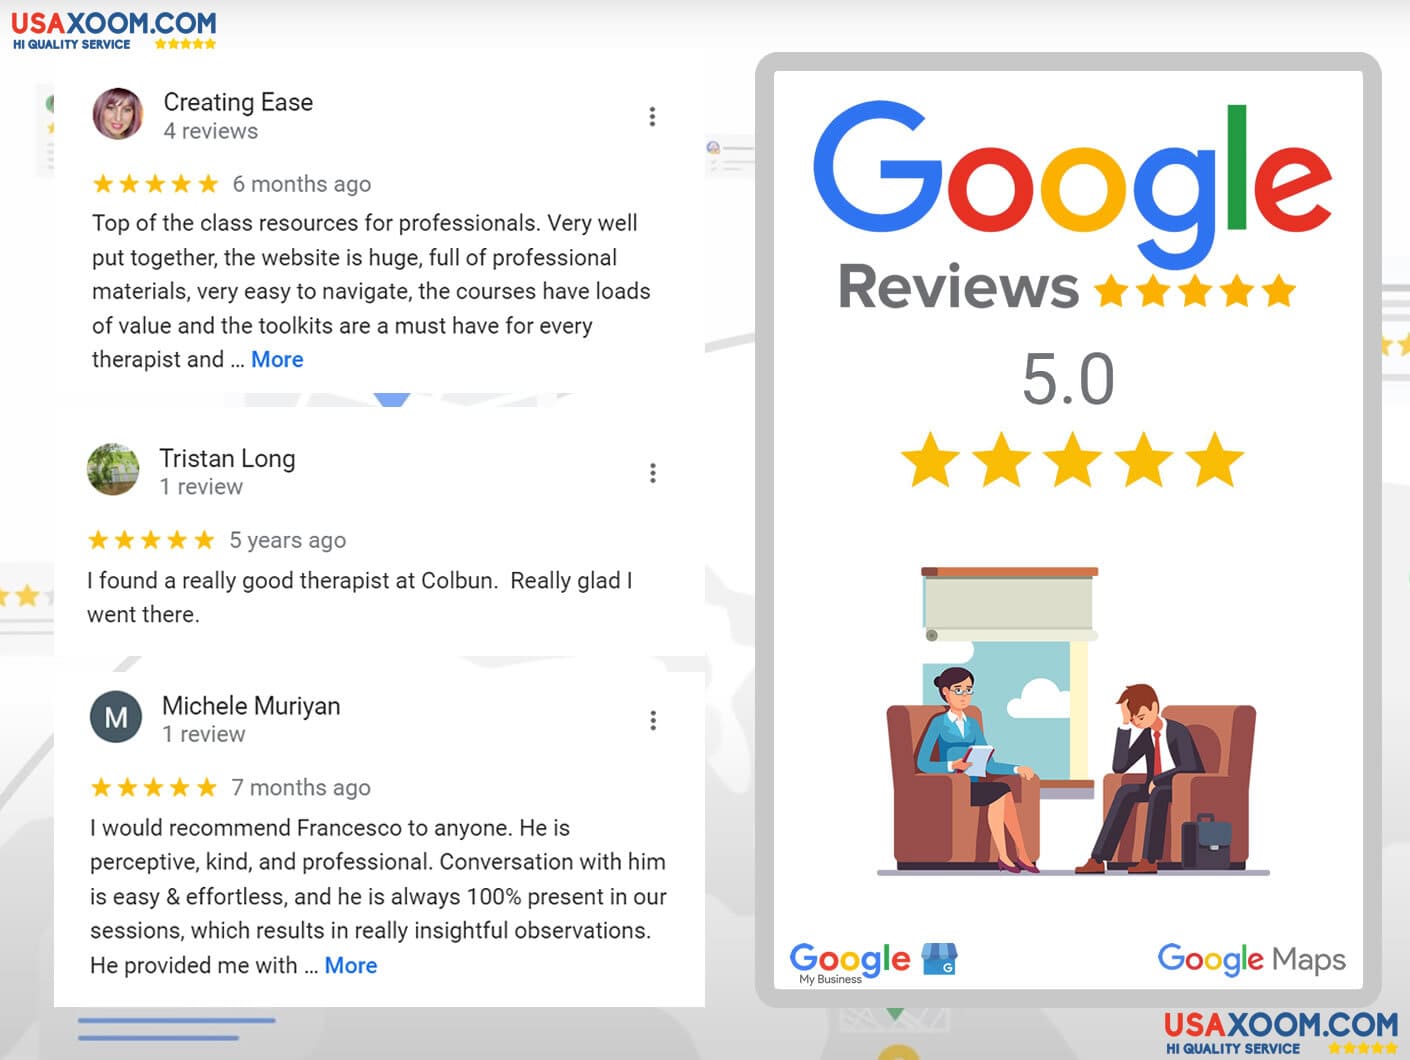 Google reviews for Therapists - A group of therapists discussing positive online reviews.